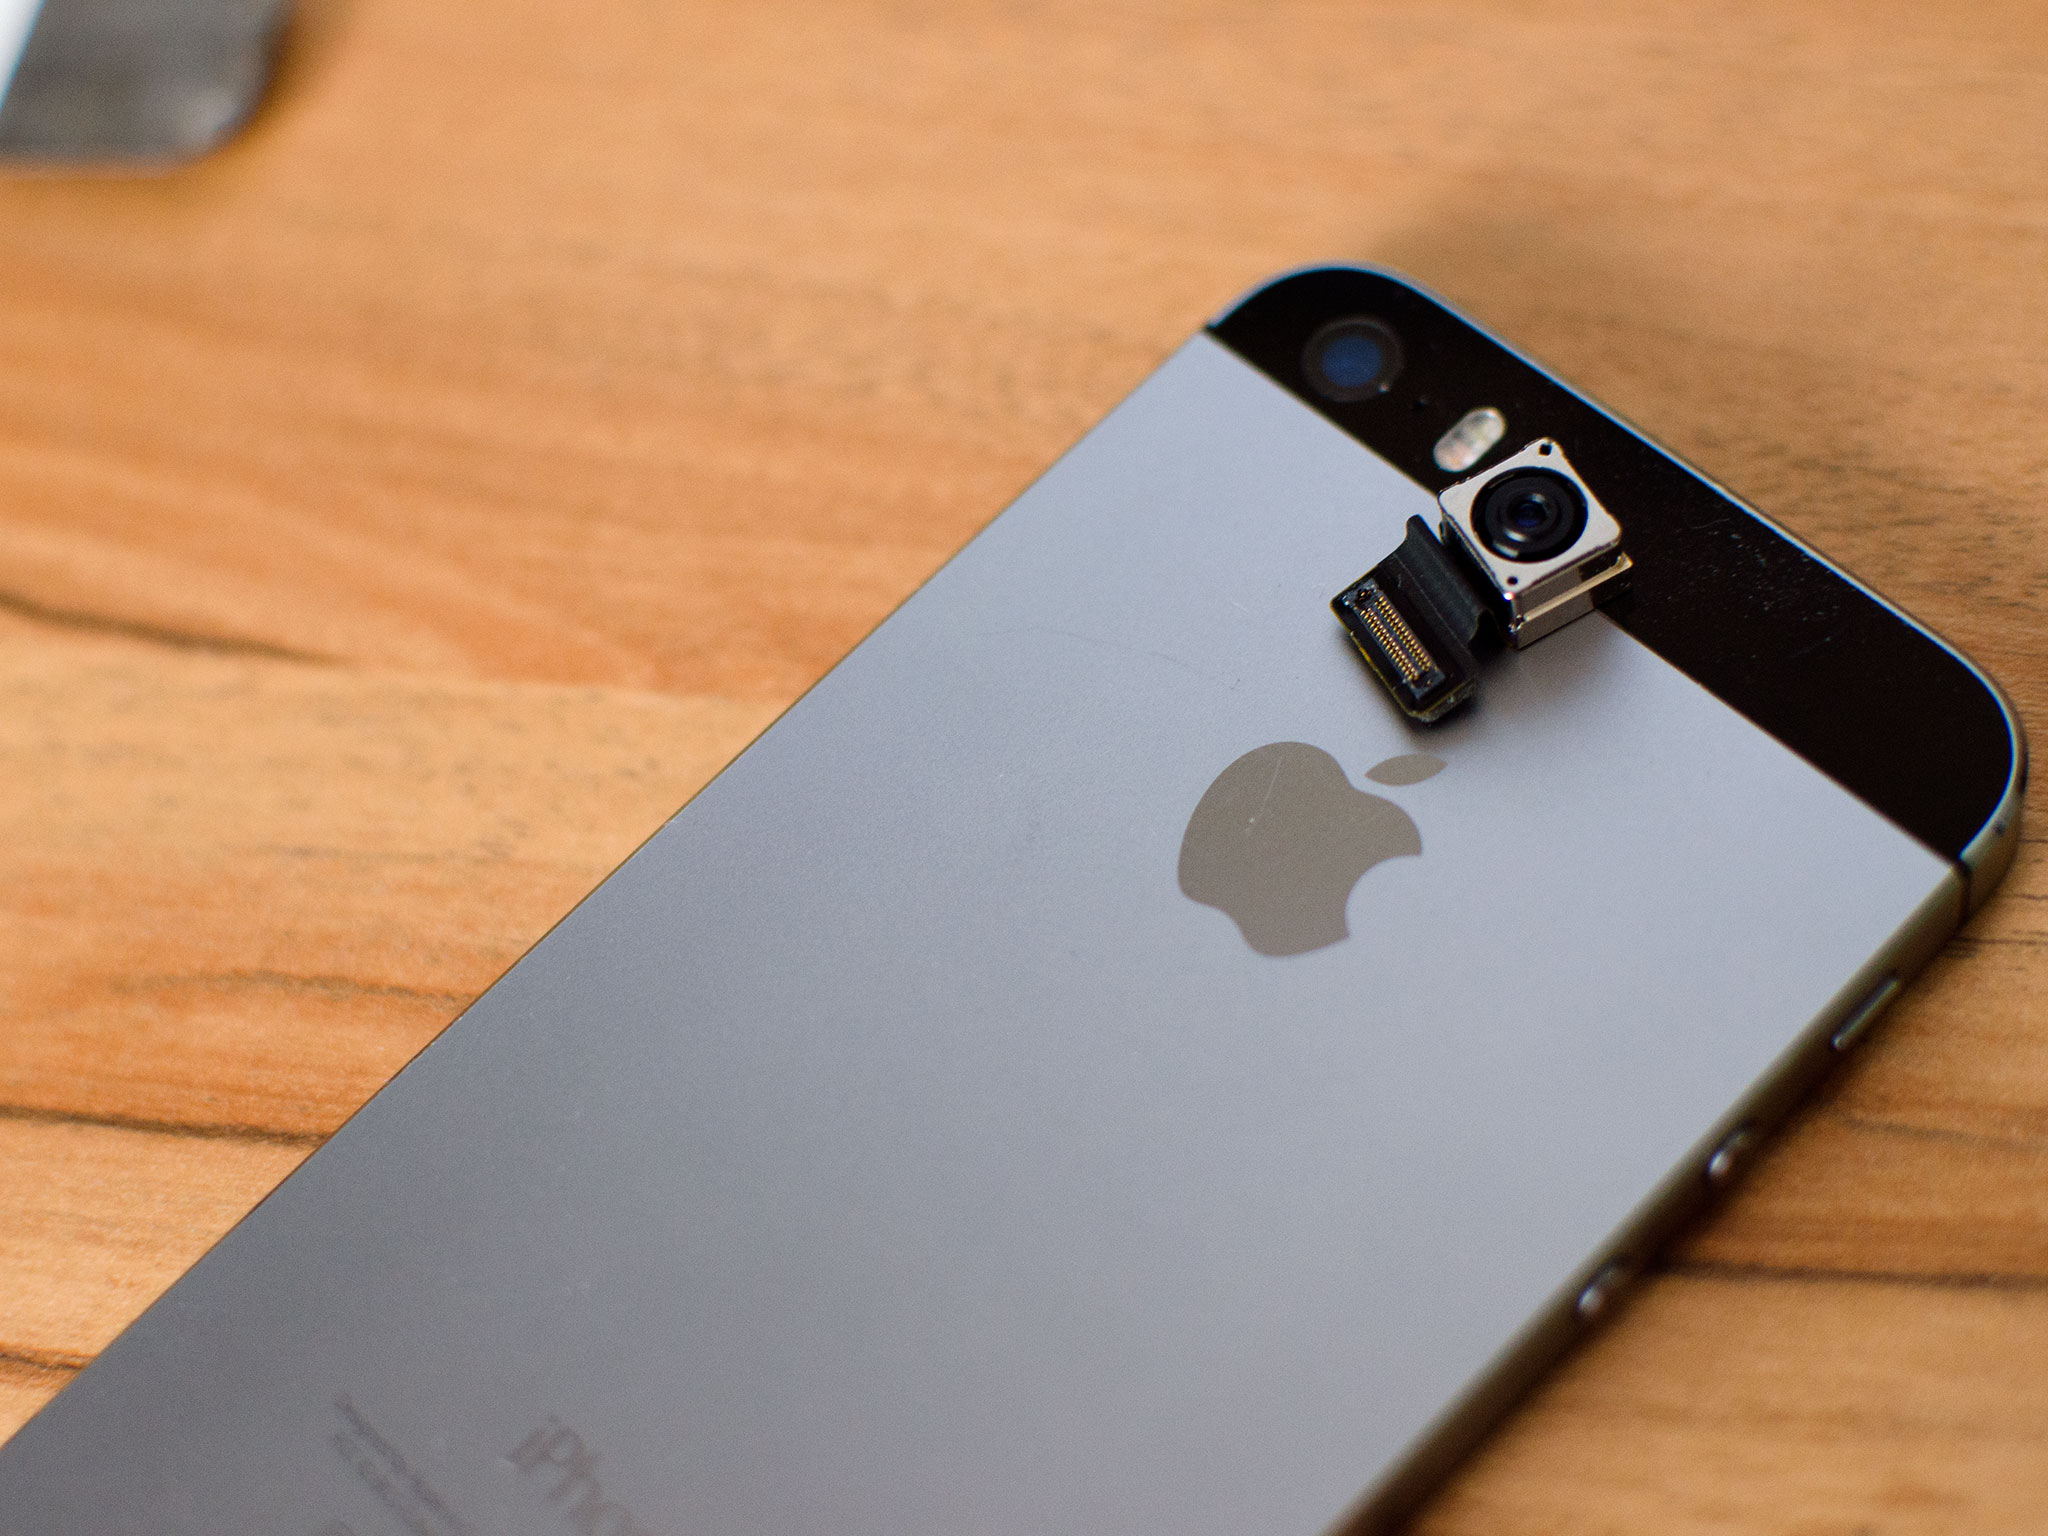 How to replace the rear iSight camera in an iPhone 5s